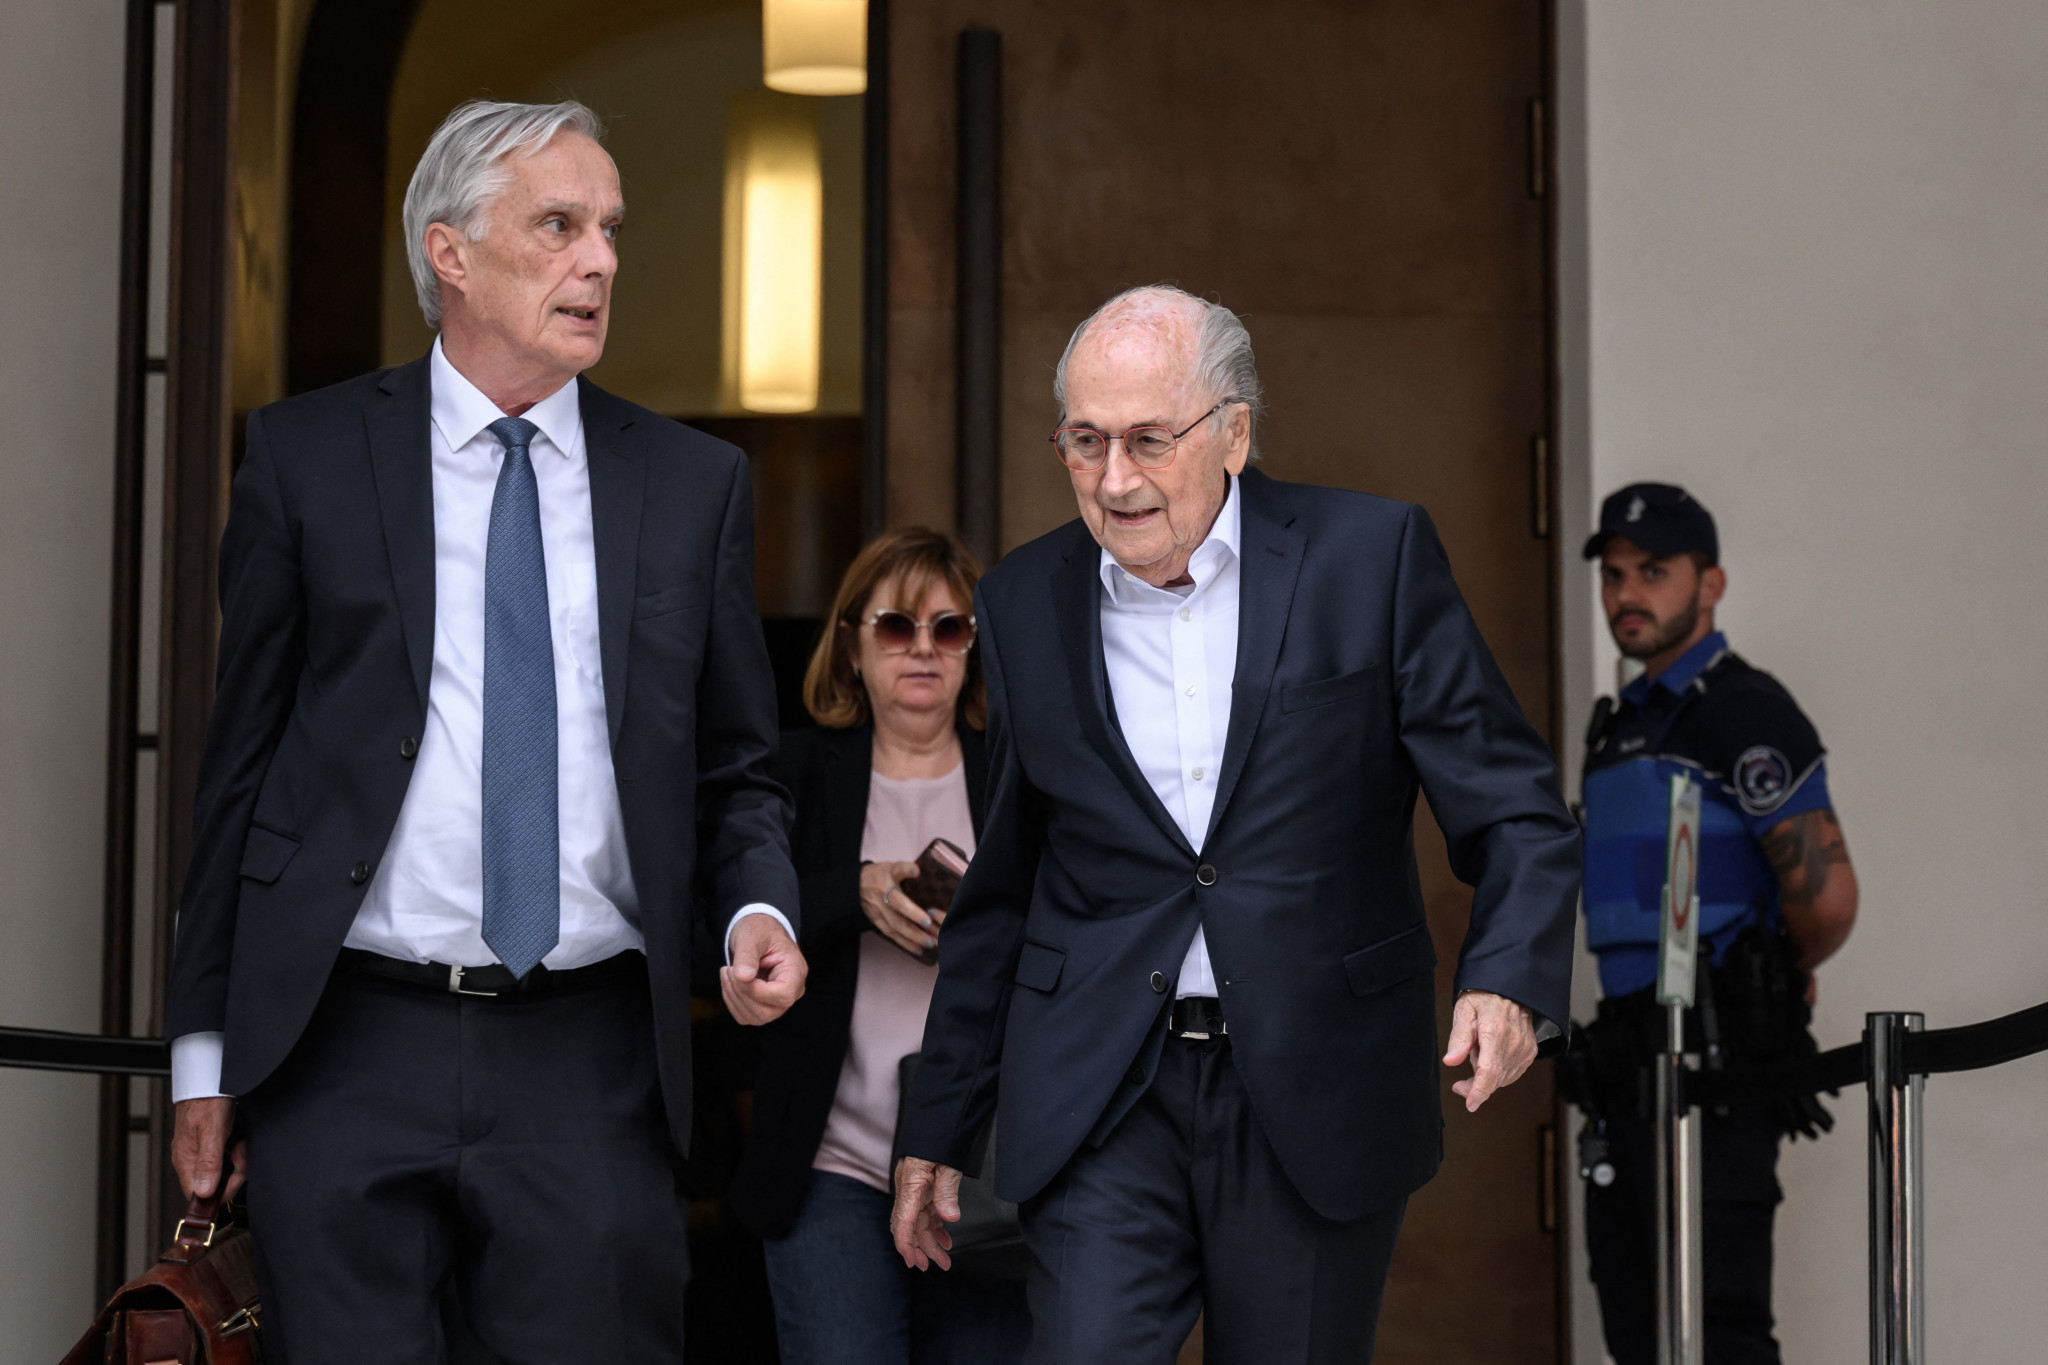 Blatter's lawyer claims acquittal only possible outcome in fraud case